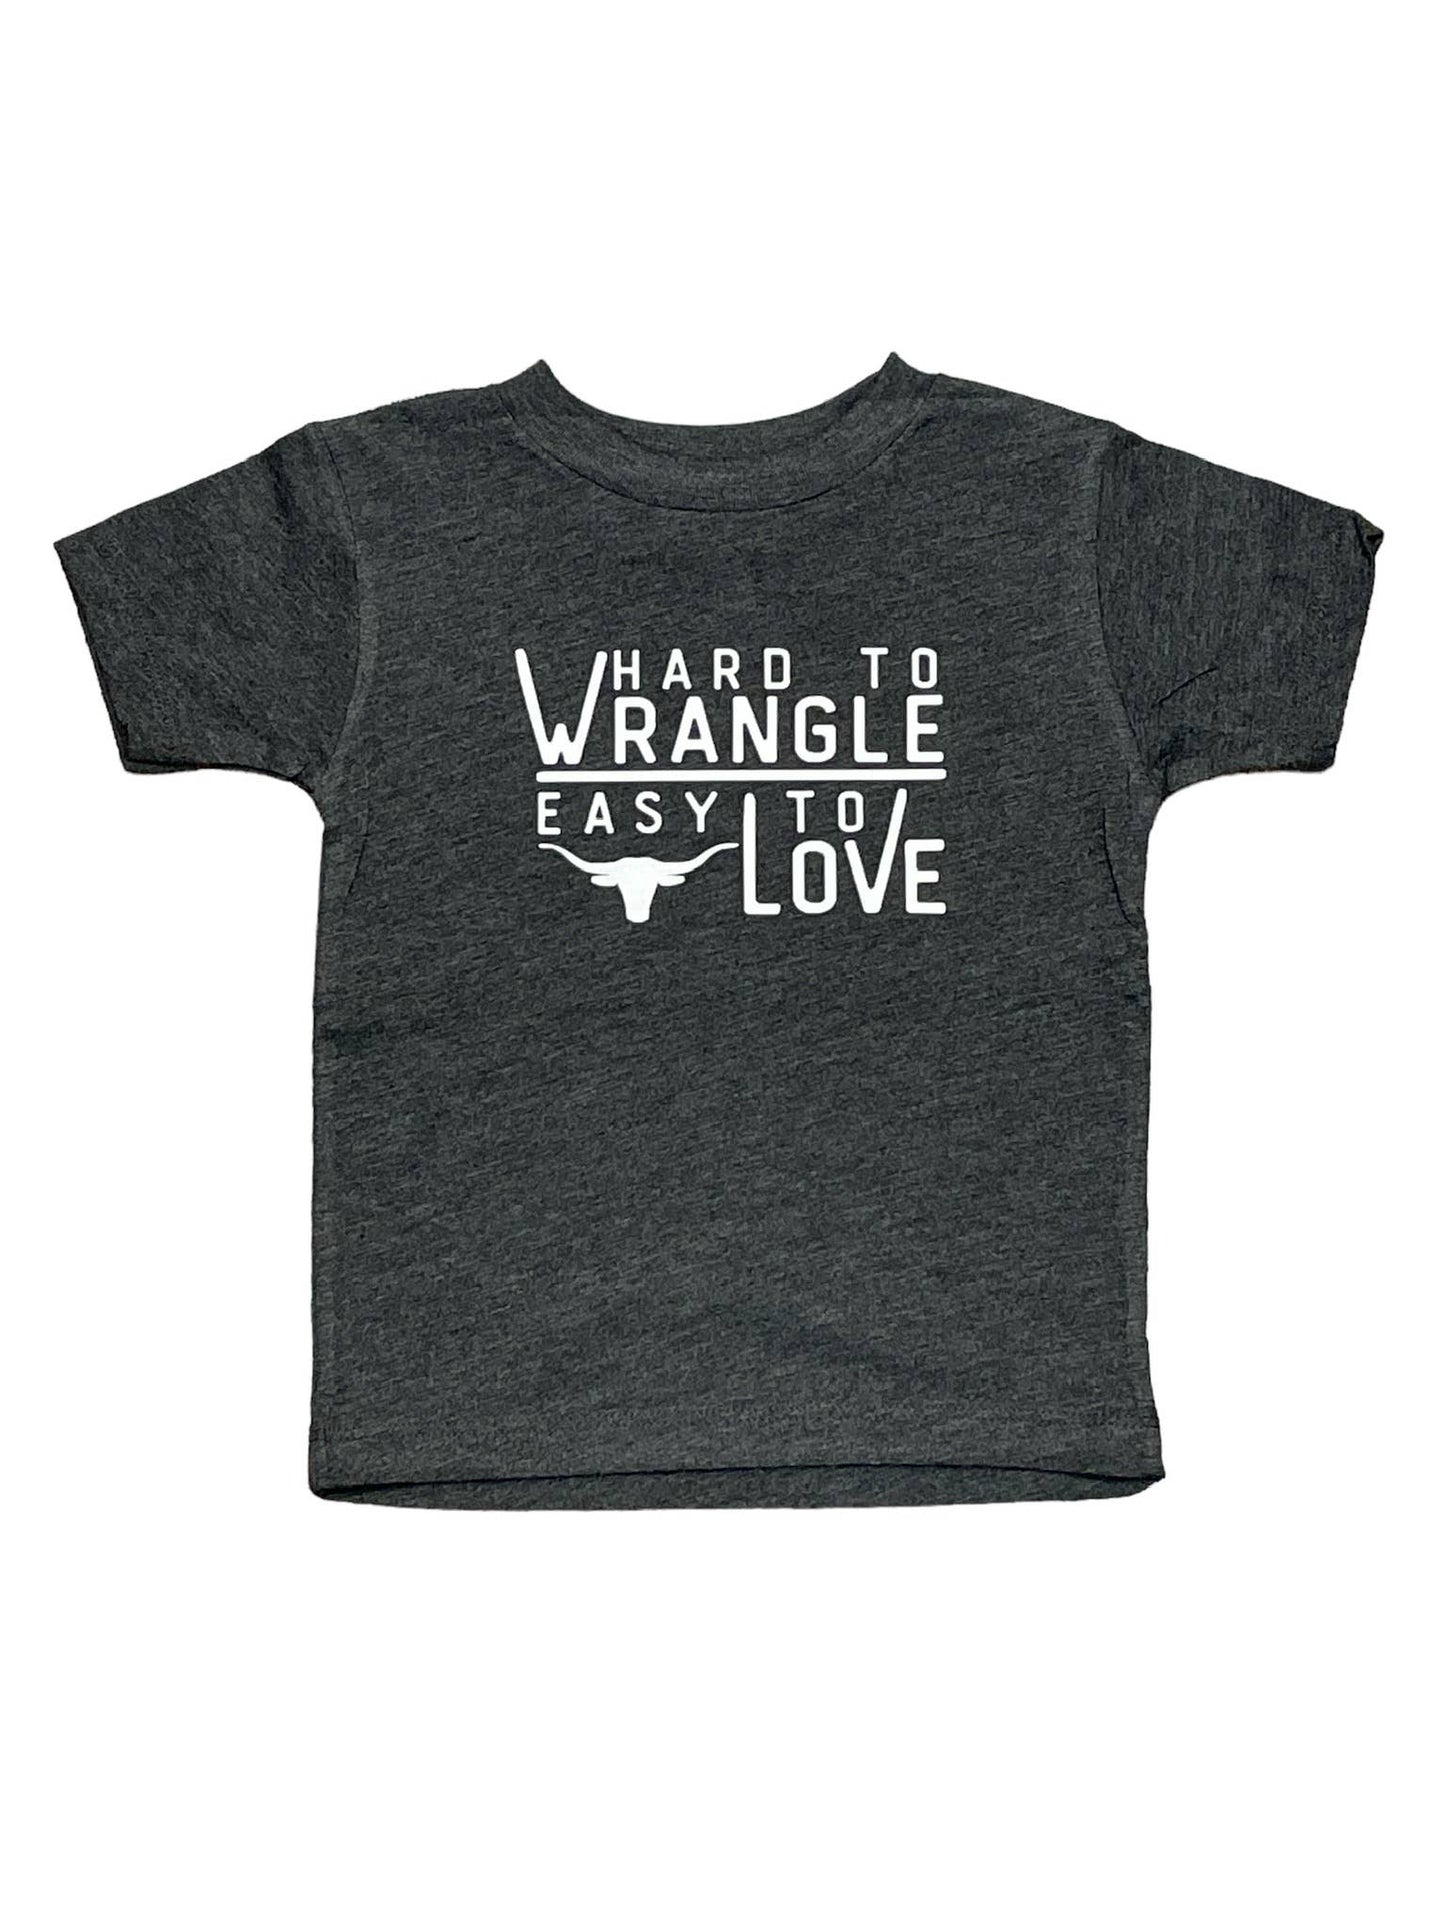 Hard to Wrangle, Easy to Love • Infant/Toddler Tee